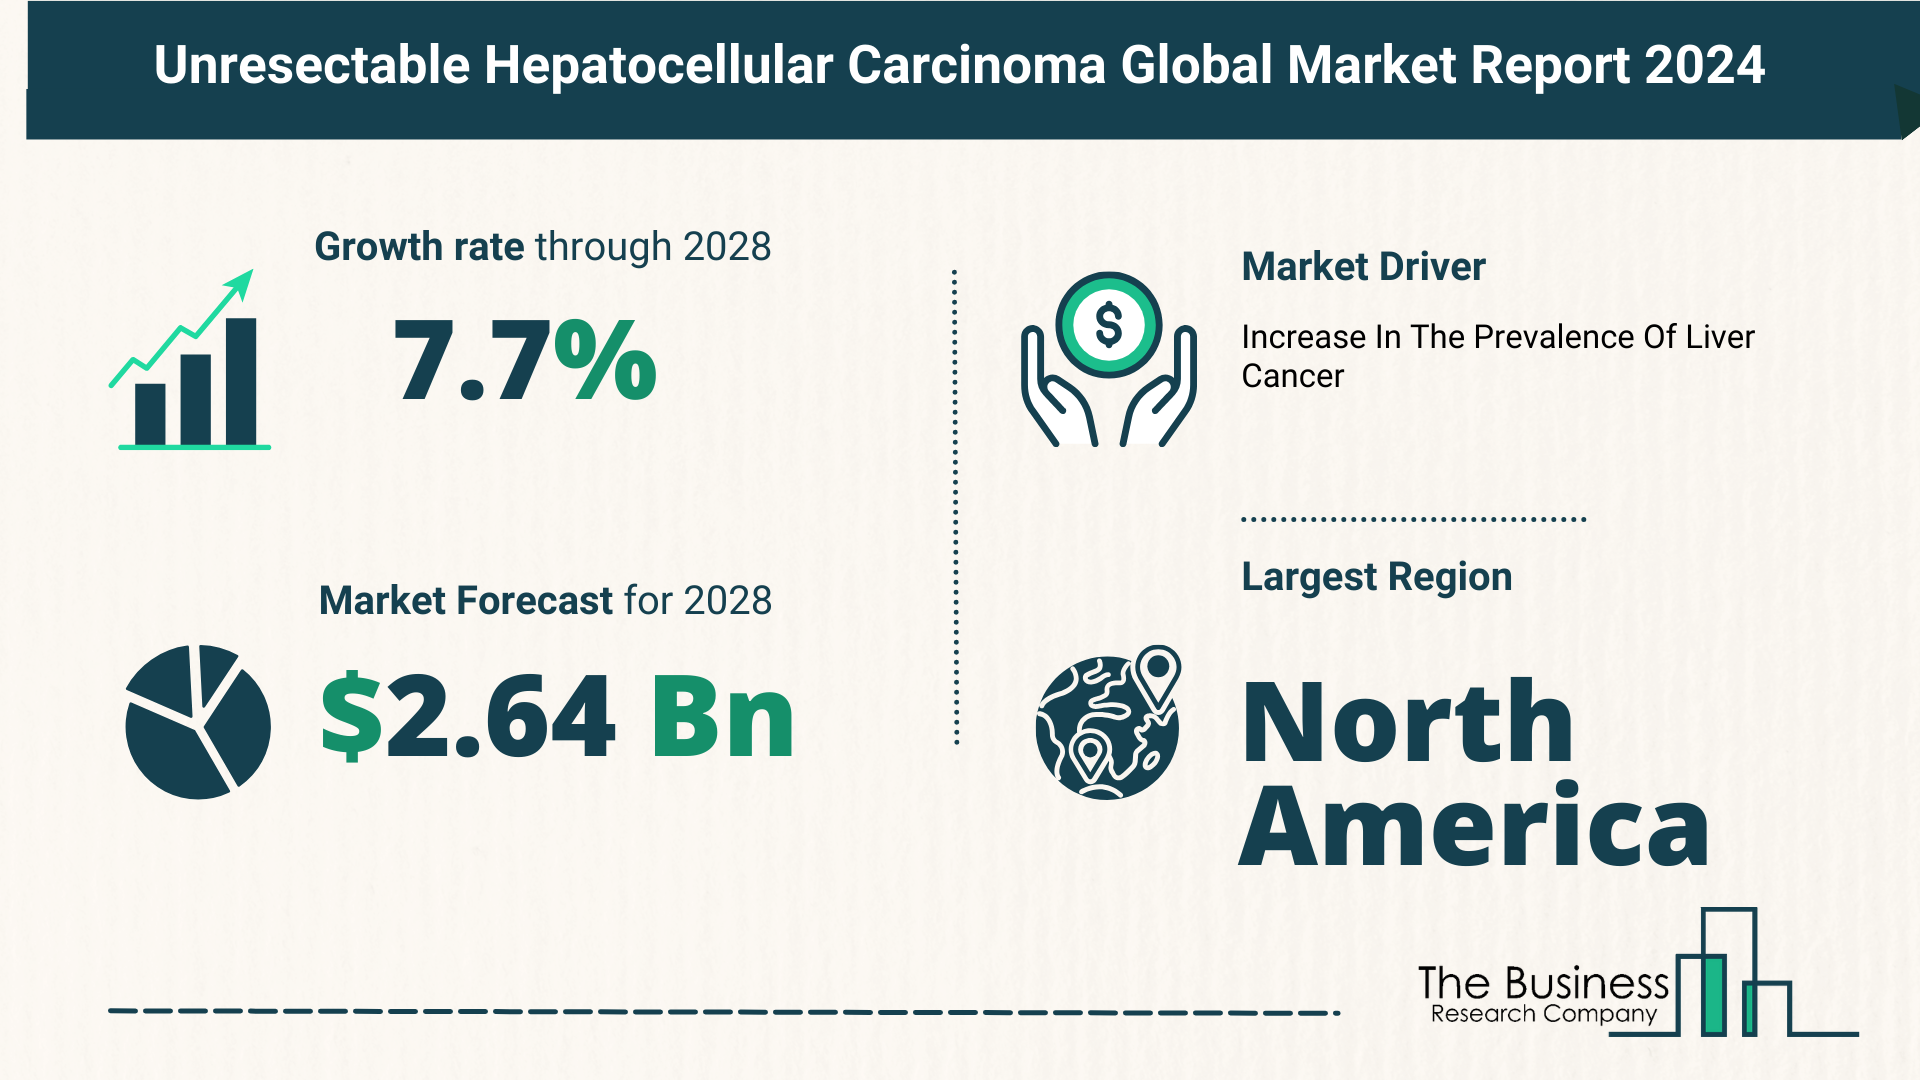 Unresectable Hepatocellular Carcinoma Market Growth Analysis Till 2033 By The Business Research Company